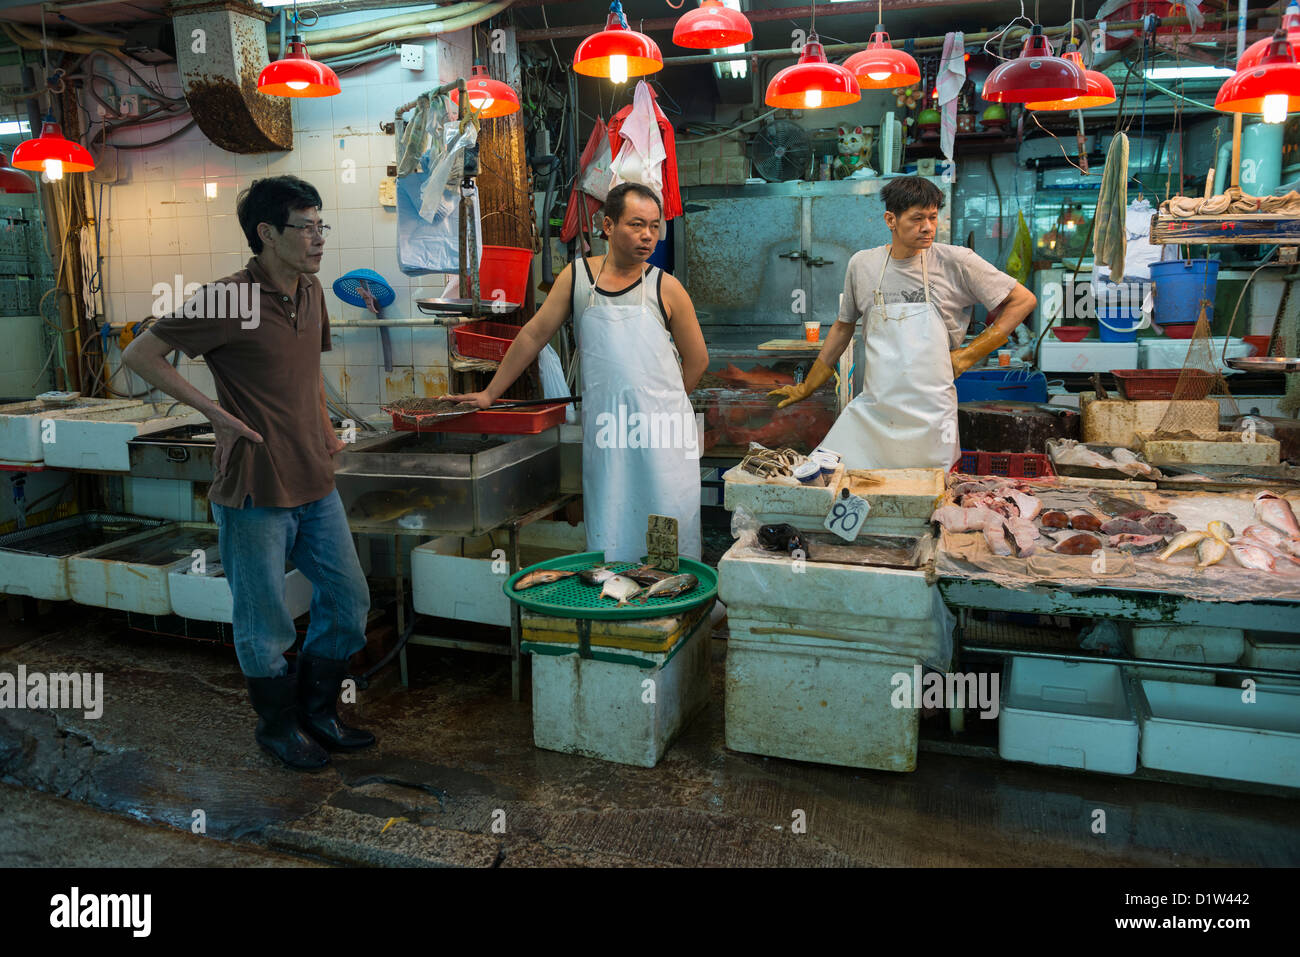 fresh-fish-and-seafood-market-stall-on-gage-street-in-central-hong-D1W442.jpg